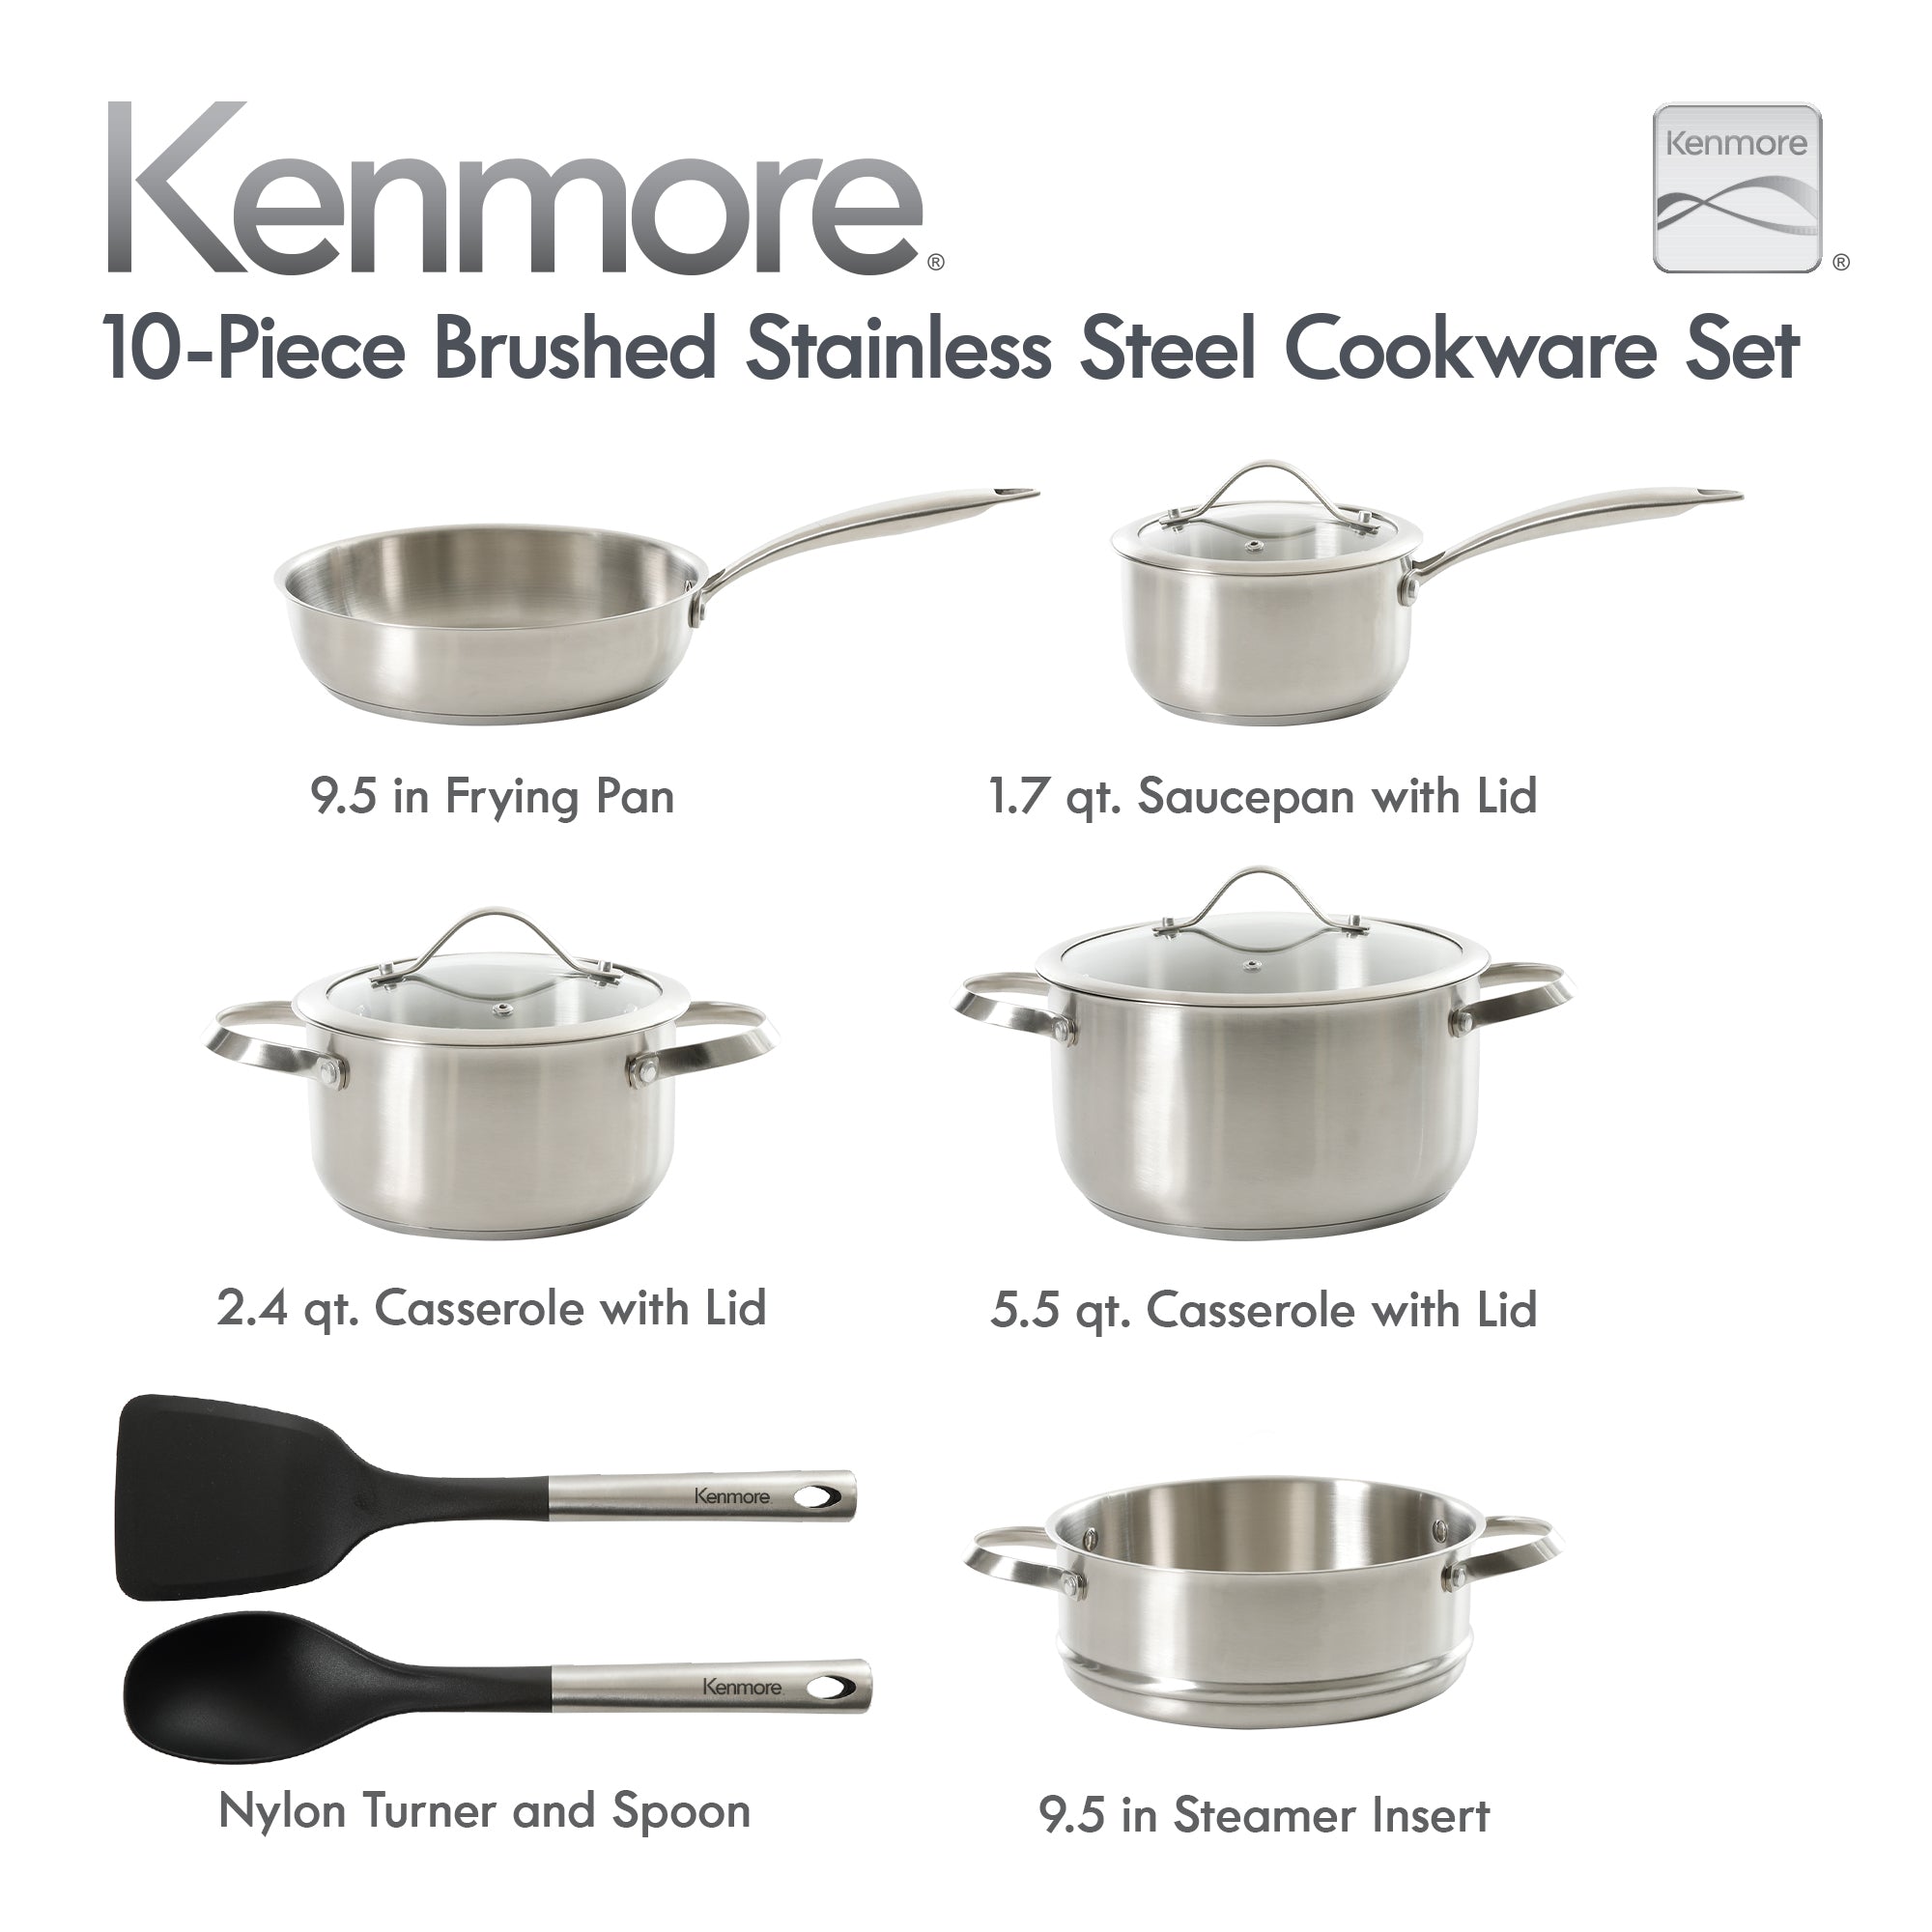 Kenmore Aiden 10-Piece Stainless Steel Cookware Set